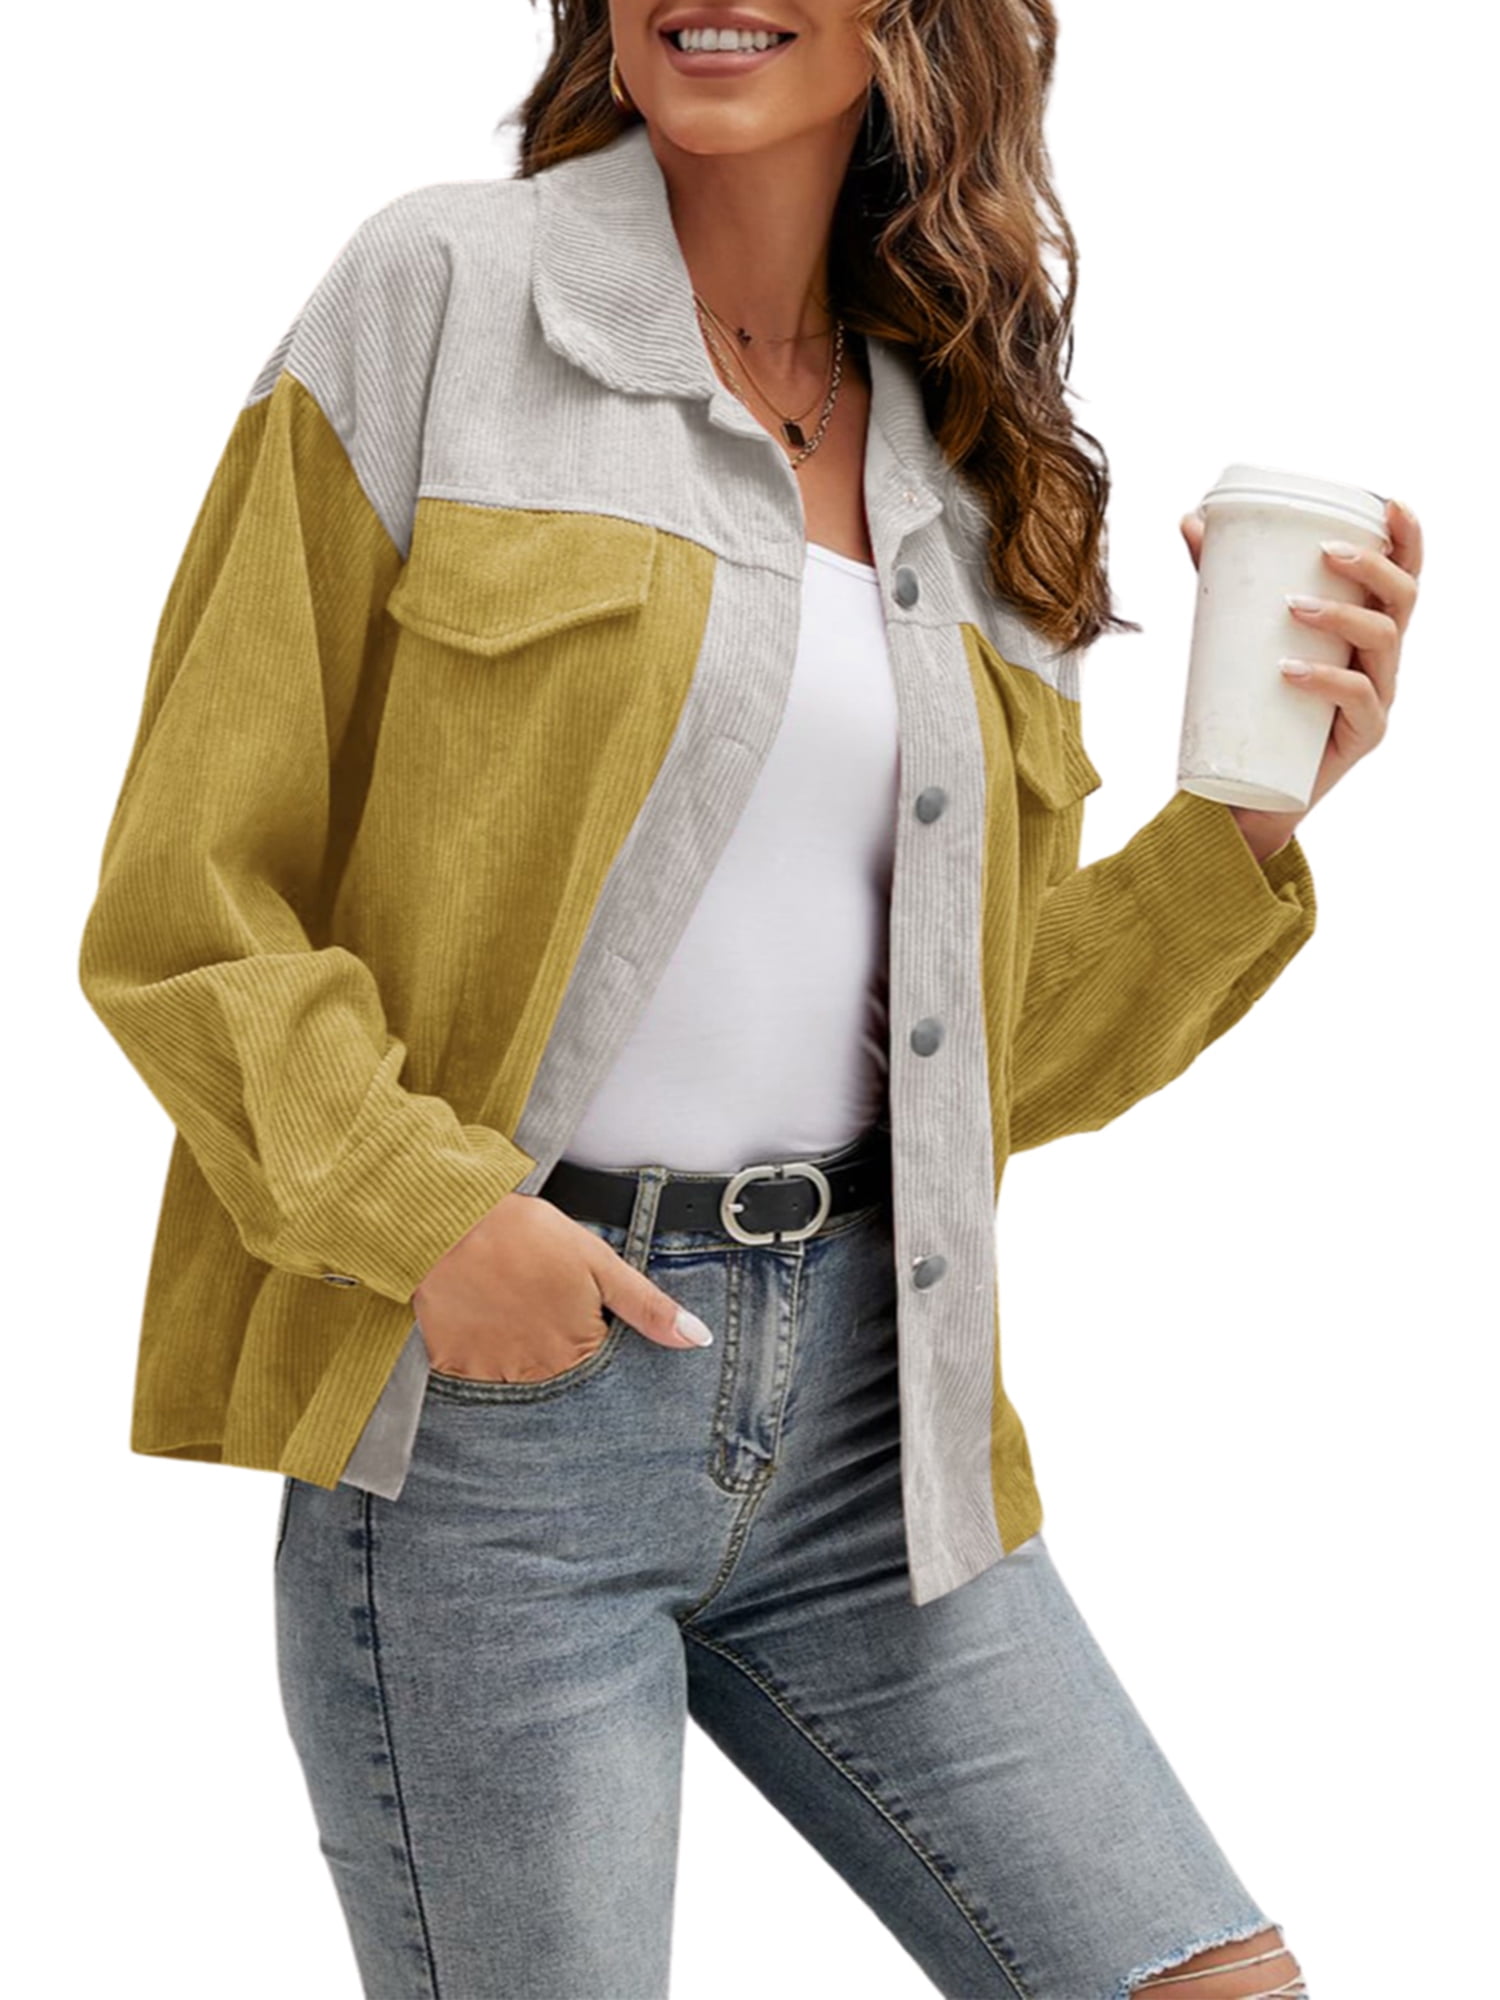 Canrulo Womens Corduroy Shirt Fleece Jacket Long Sleeve Button Down Collar  Coat Oversized Tops Shacket outwear with Flap Pocket 